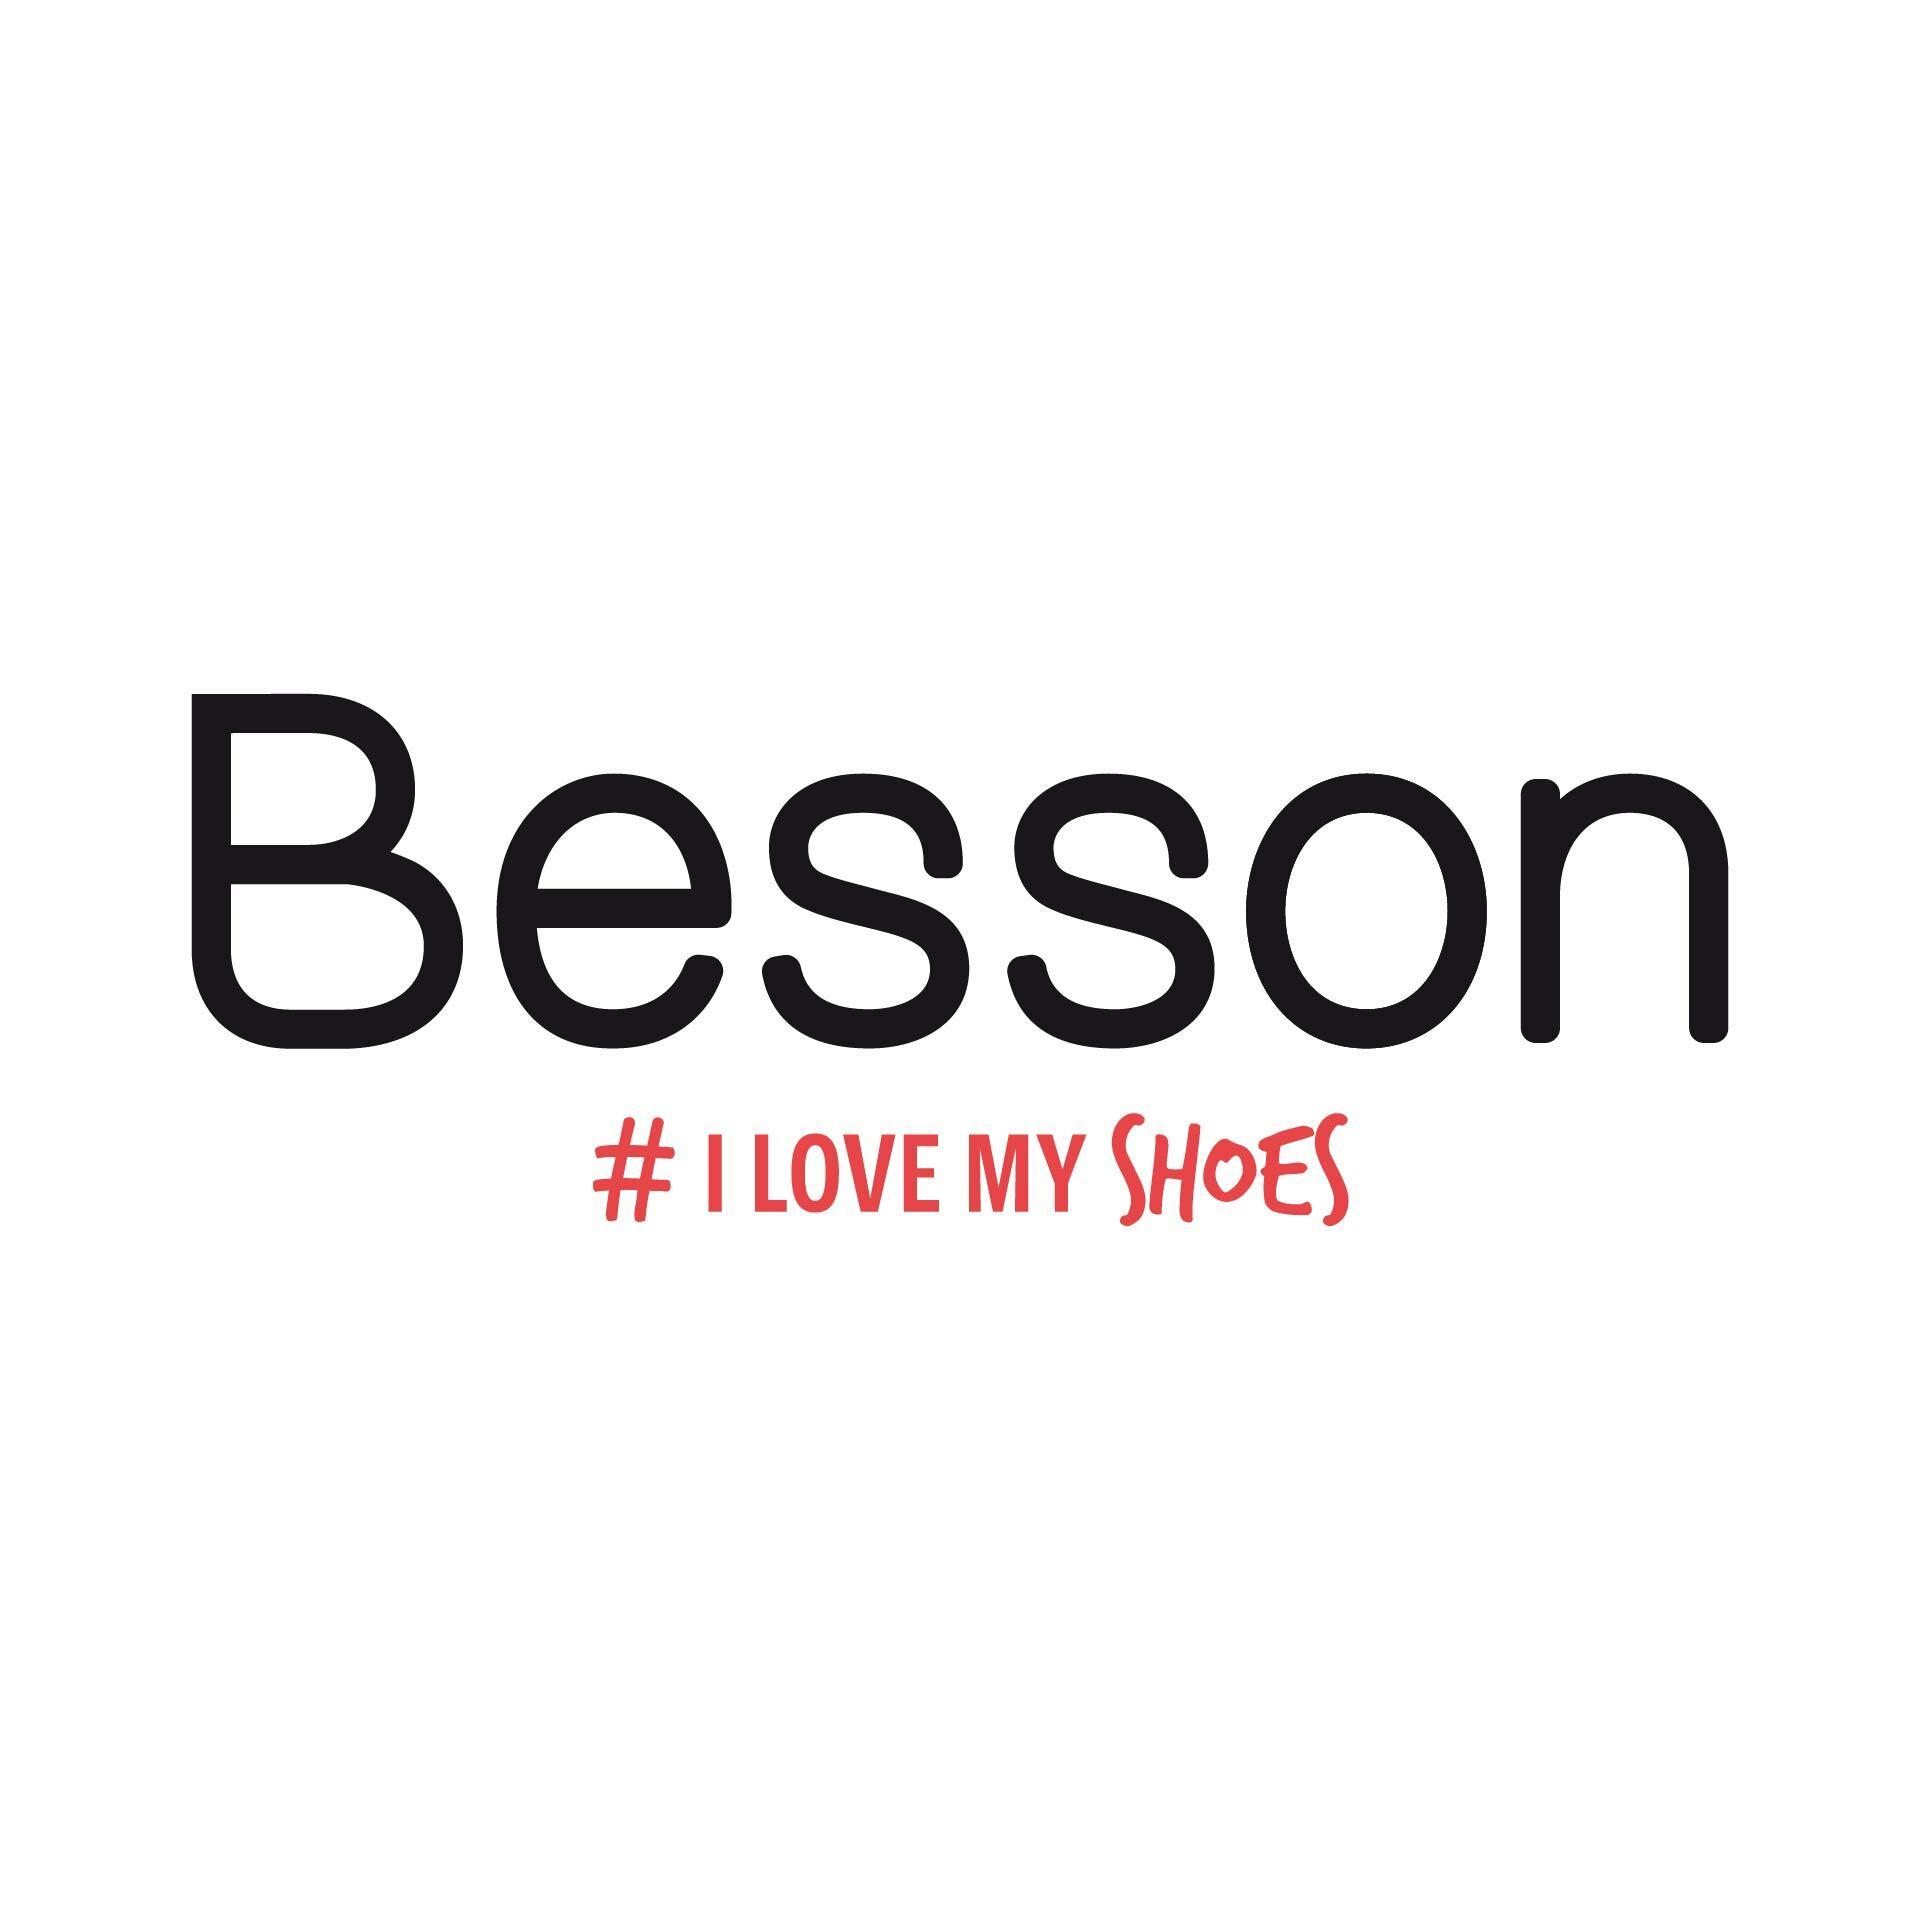 Besson Chaussures Limoges Limoges